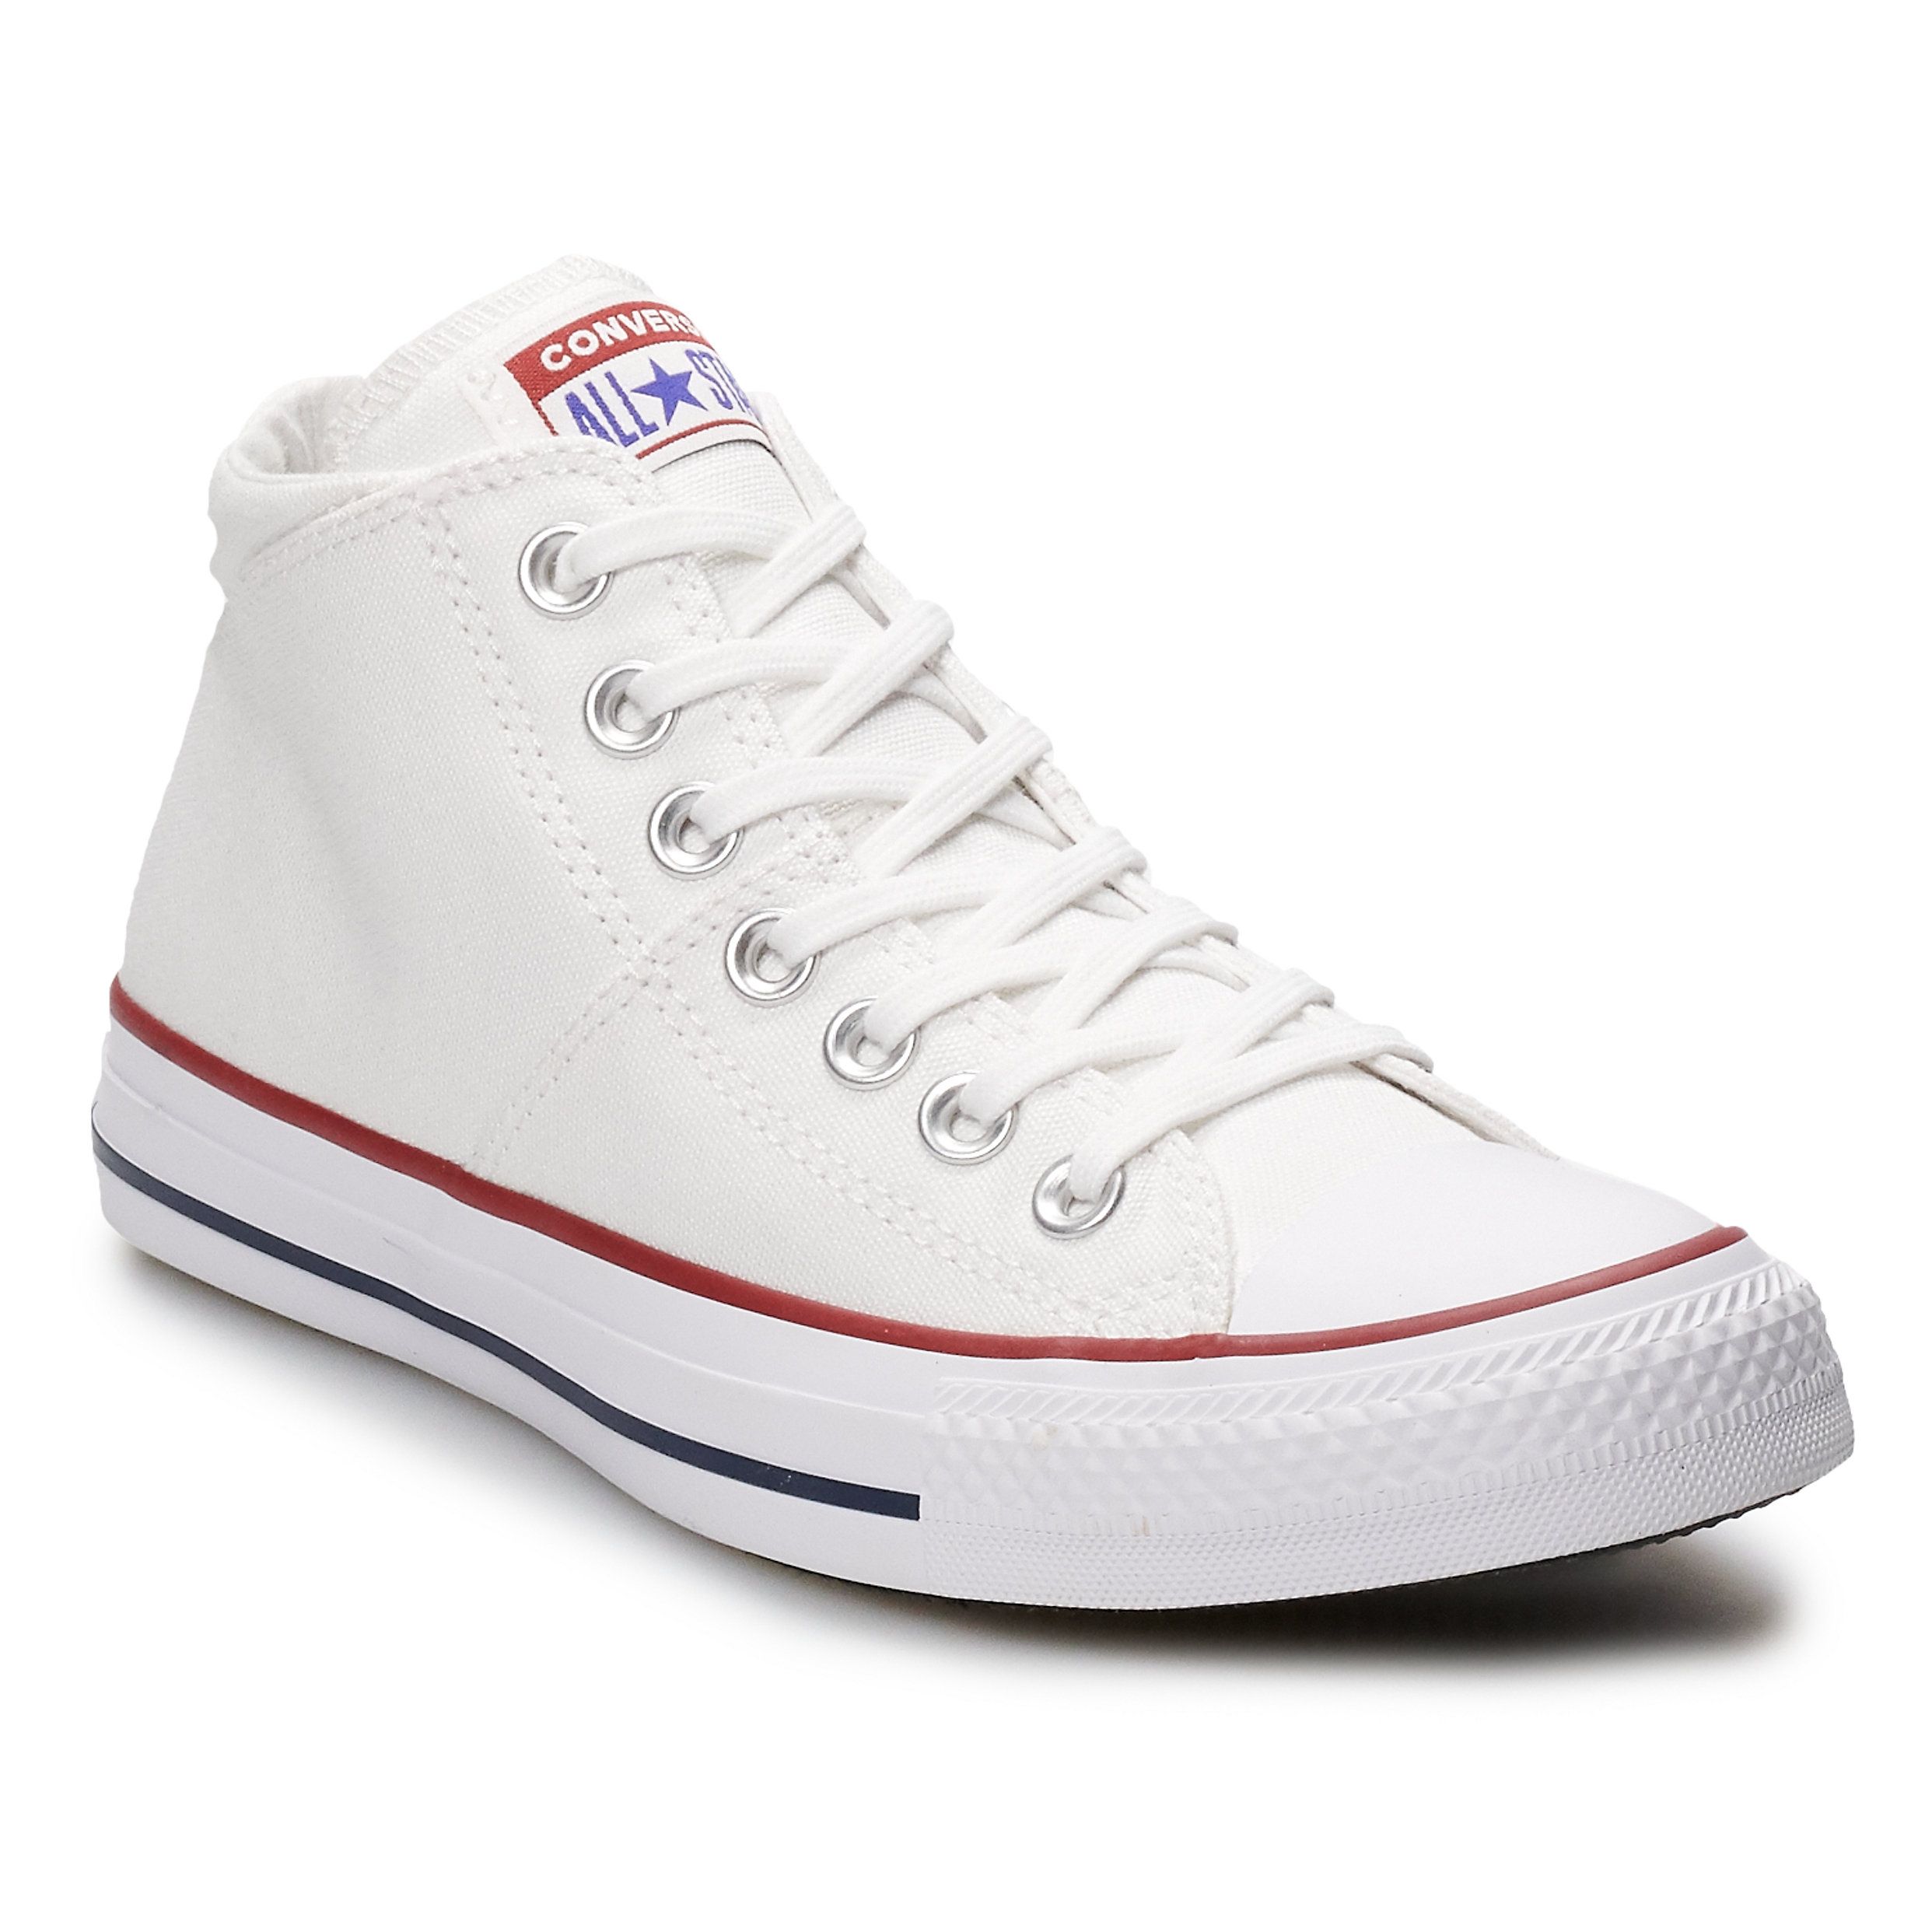 Women's Converse Chuck Taylor All Star Madison Mid Sneakers | Kohl's